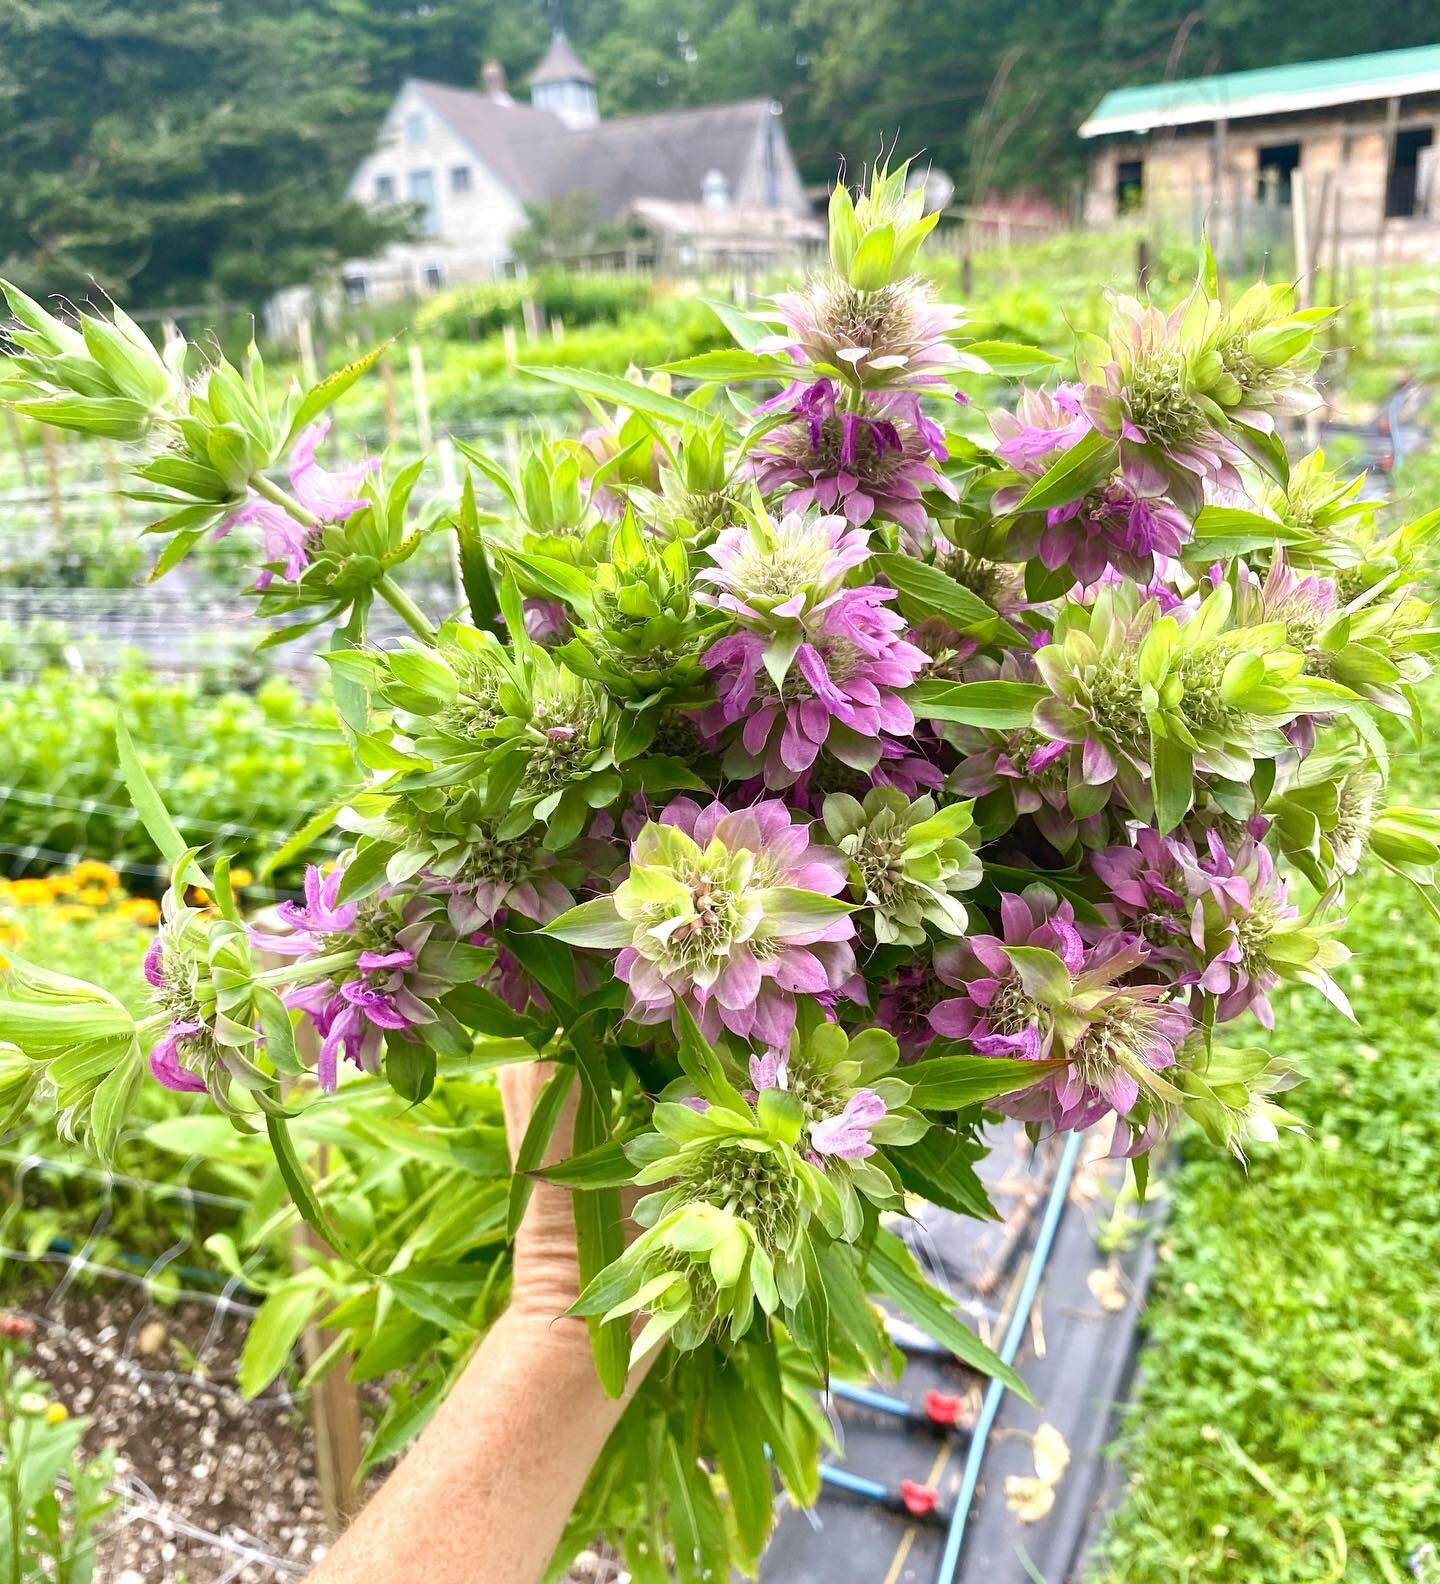 I had heard other flower growers rave about this Lemon Mint Monarda but I didn&rsquo;t try growing it till this season. Soo magical and versatile, it&rsquo;s a keeper 💗💗
.
.
#flowermagic #inspiredbypetals #flowers #flower #fleurs #blooms #flowerfar